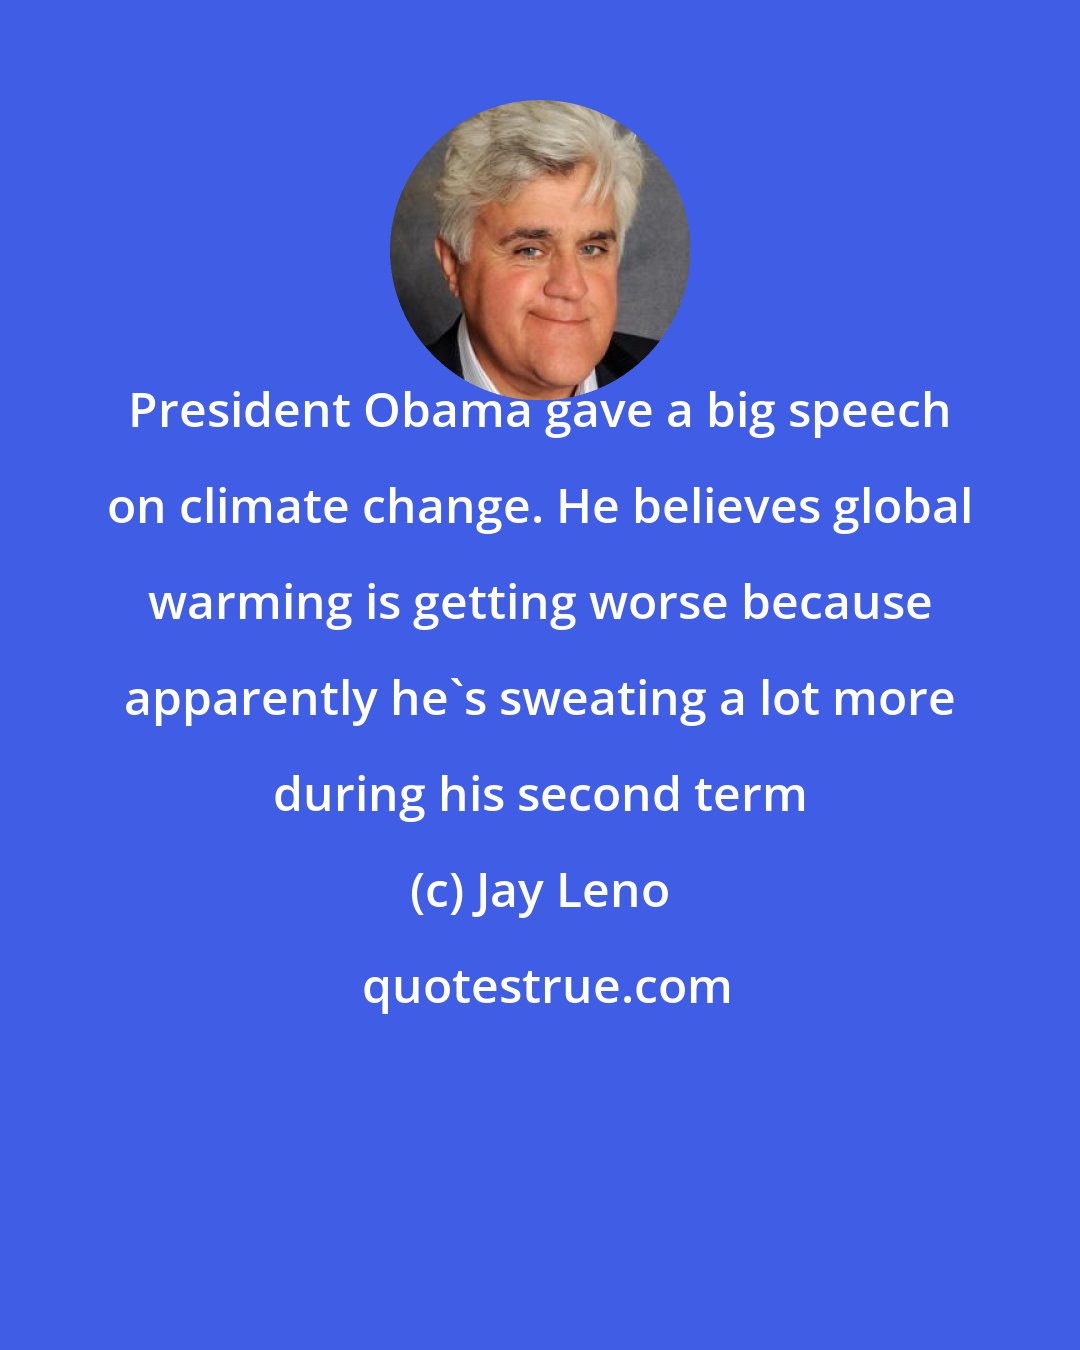 Jay Leno: President Obama gave a big speech on climate change. He believes global warming is getting worse because apparently he's sweating a lot more during his second term